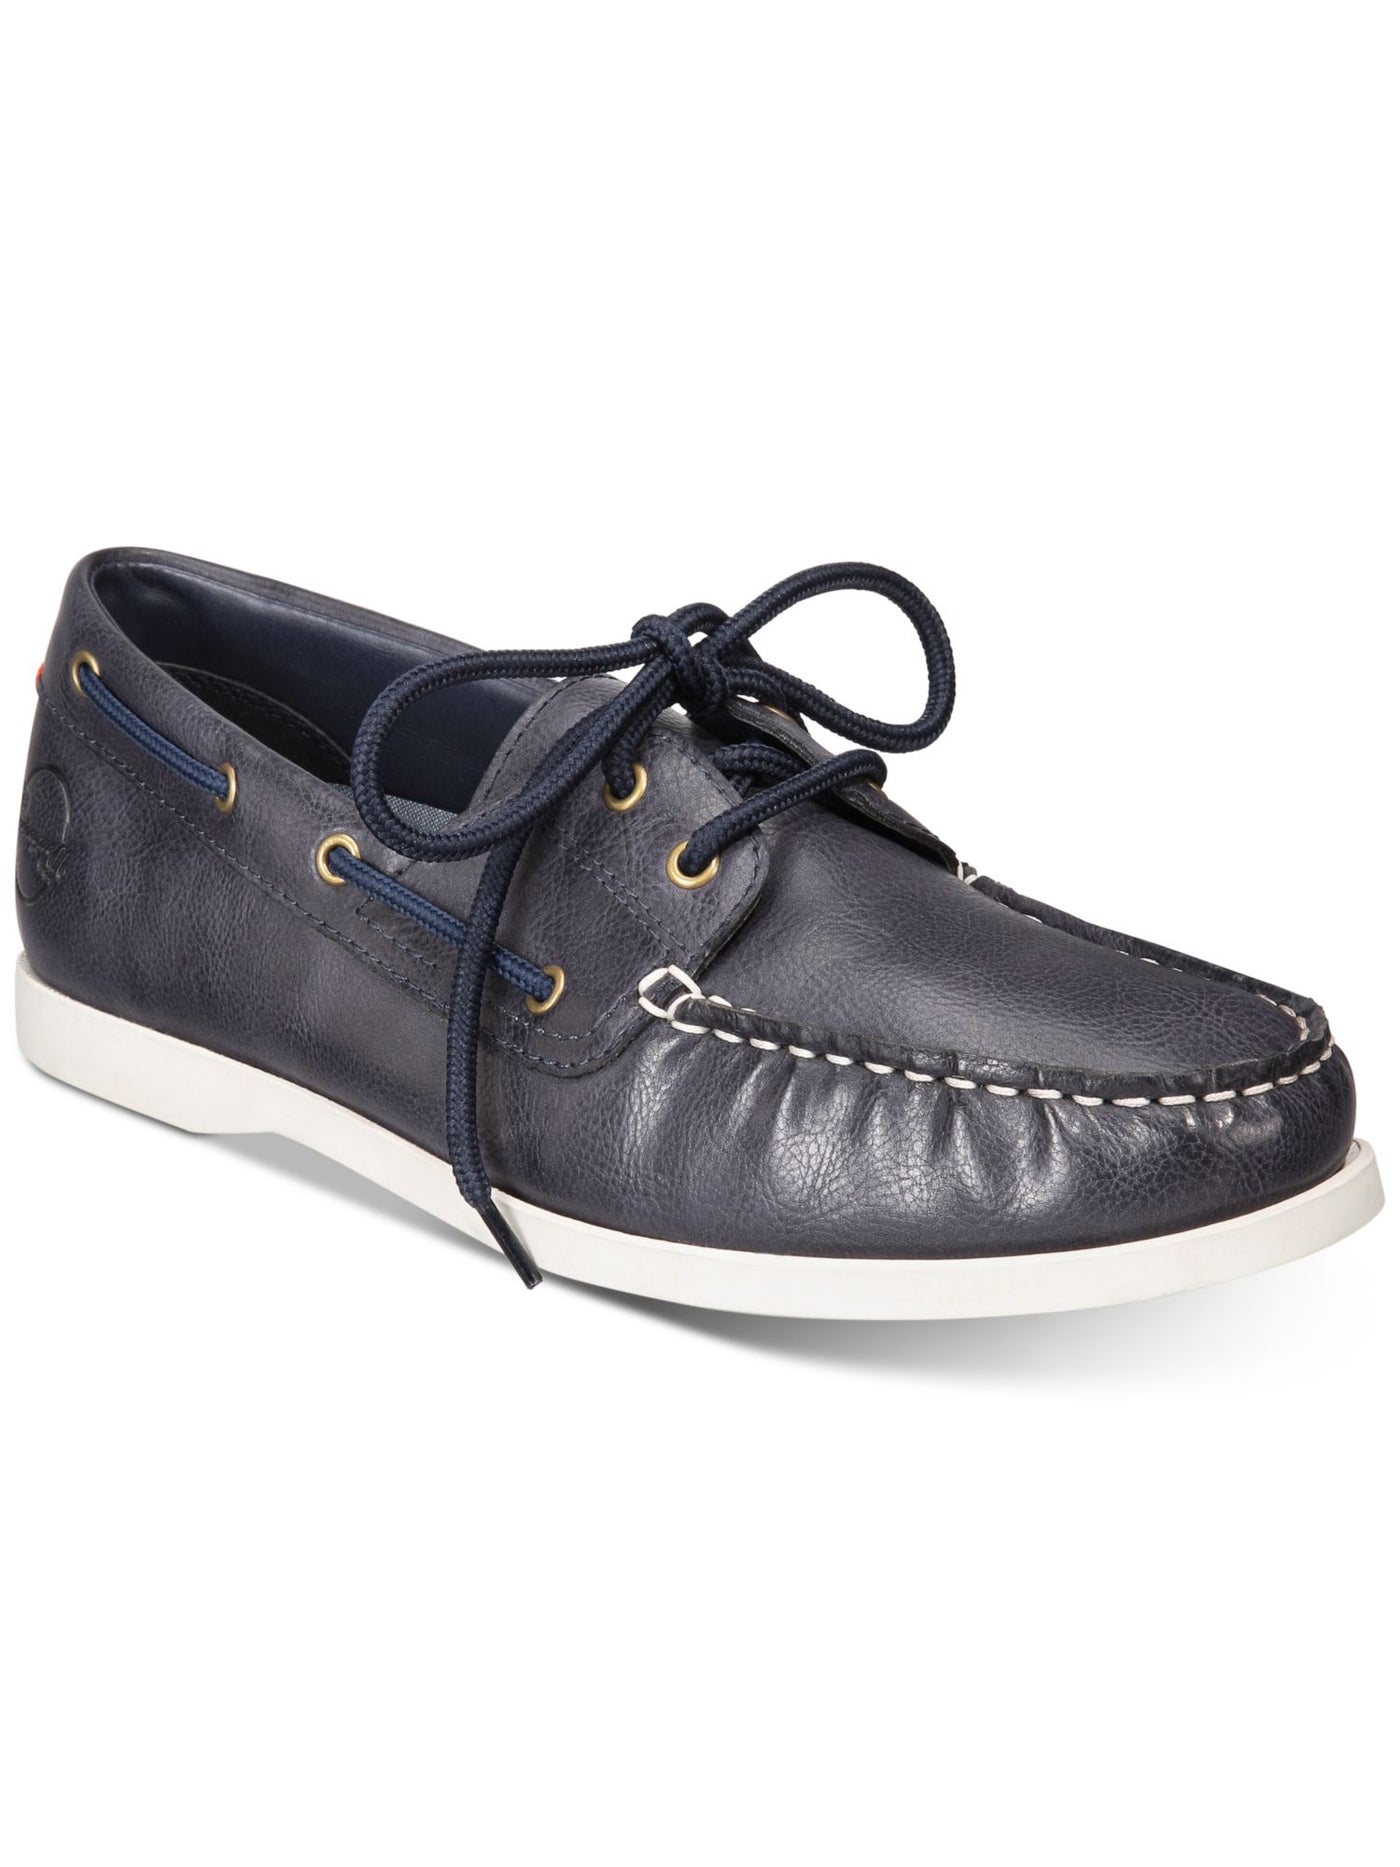 WEATHERPROOF VINTAGE Mens Navy Cushioned Benny Round Toe Lace-Up Boat Shoes 11 M